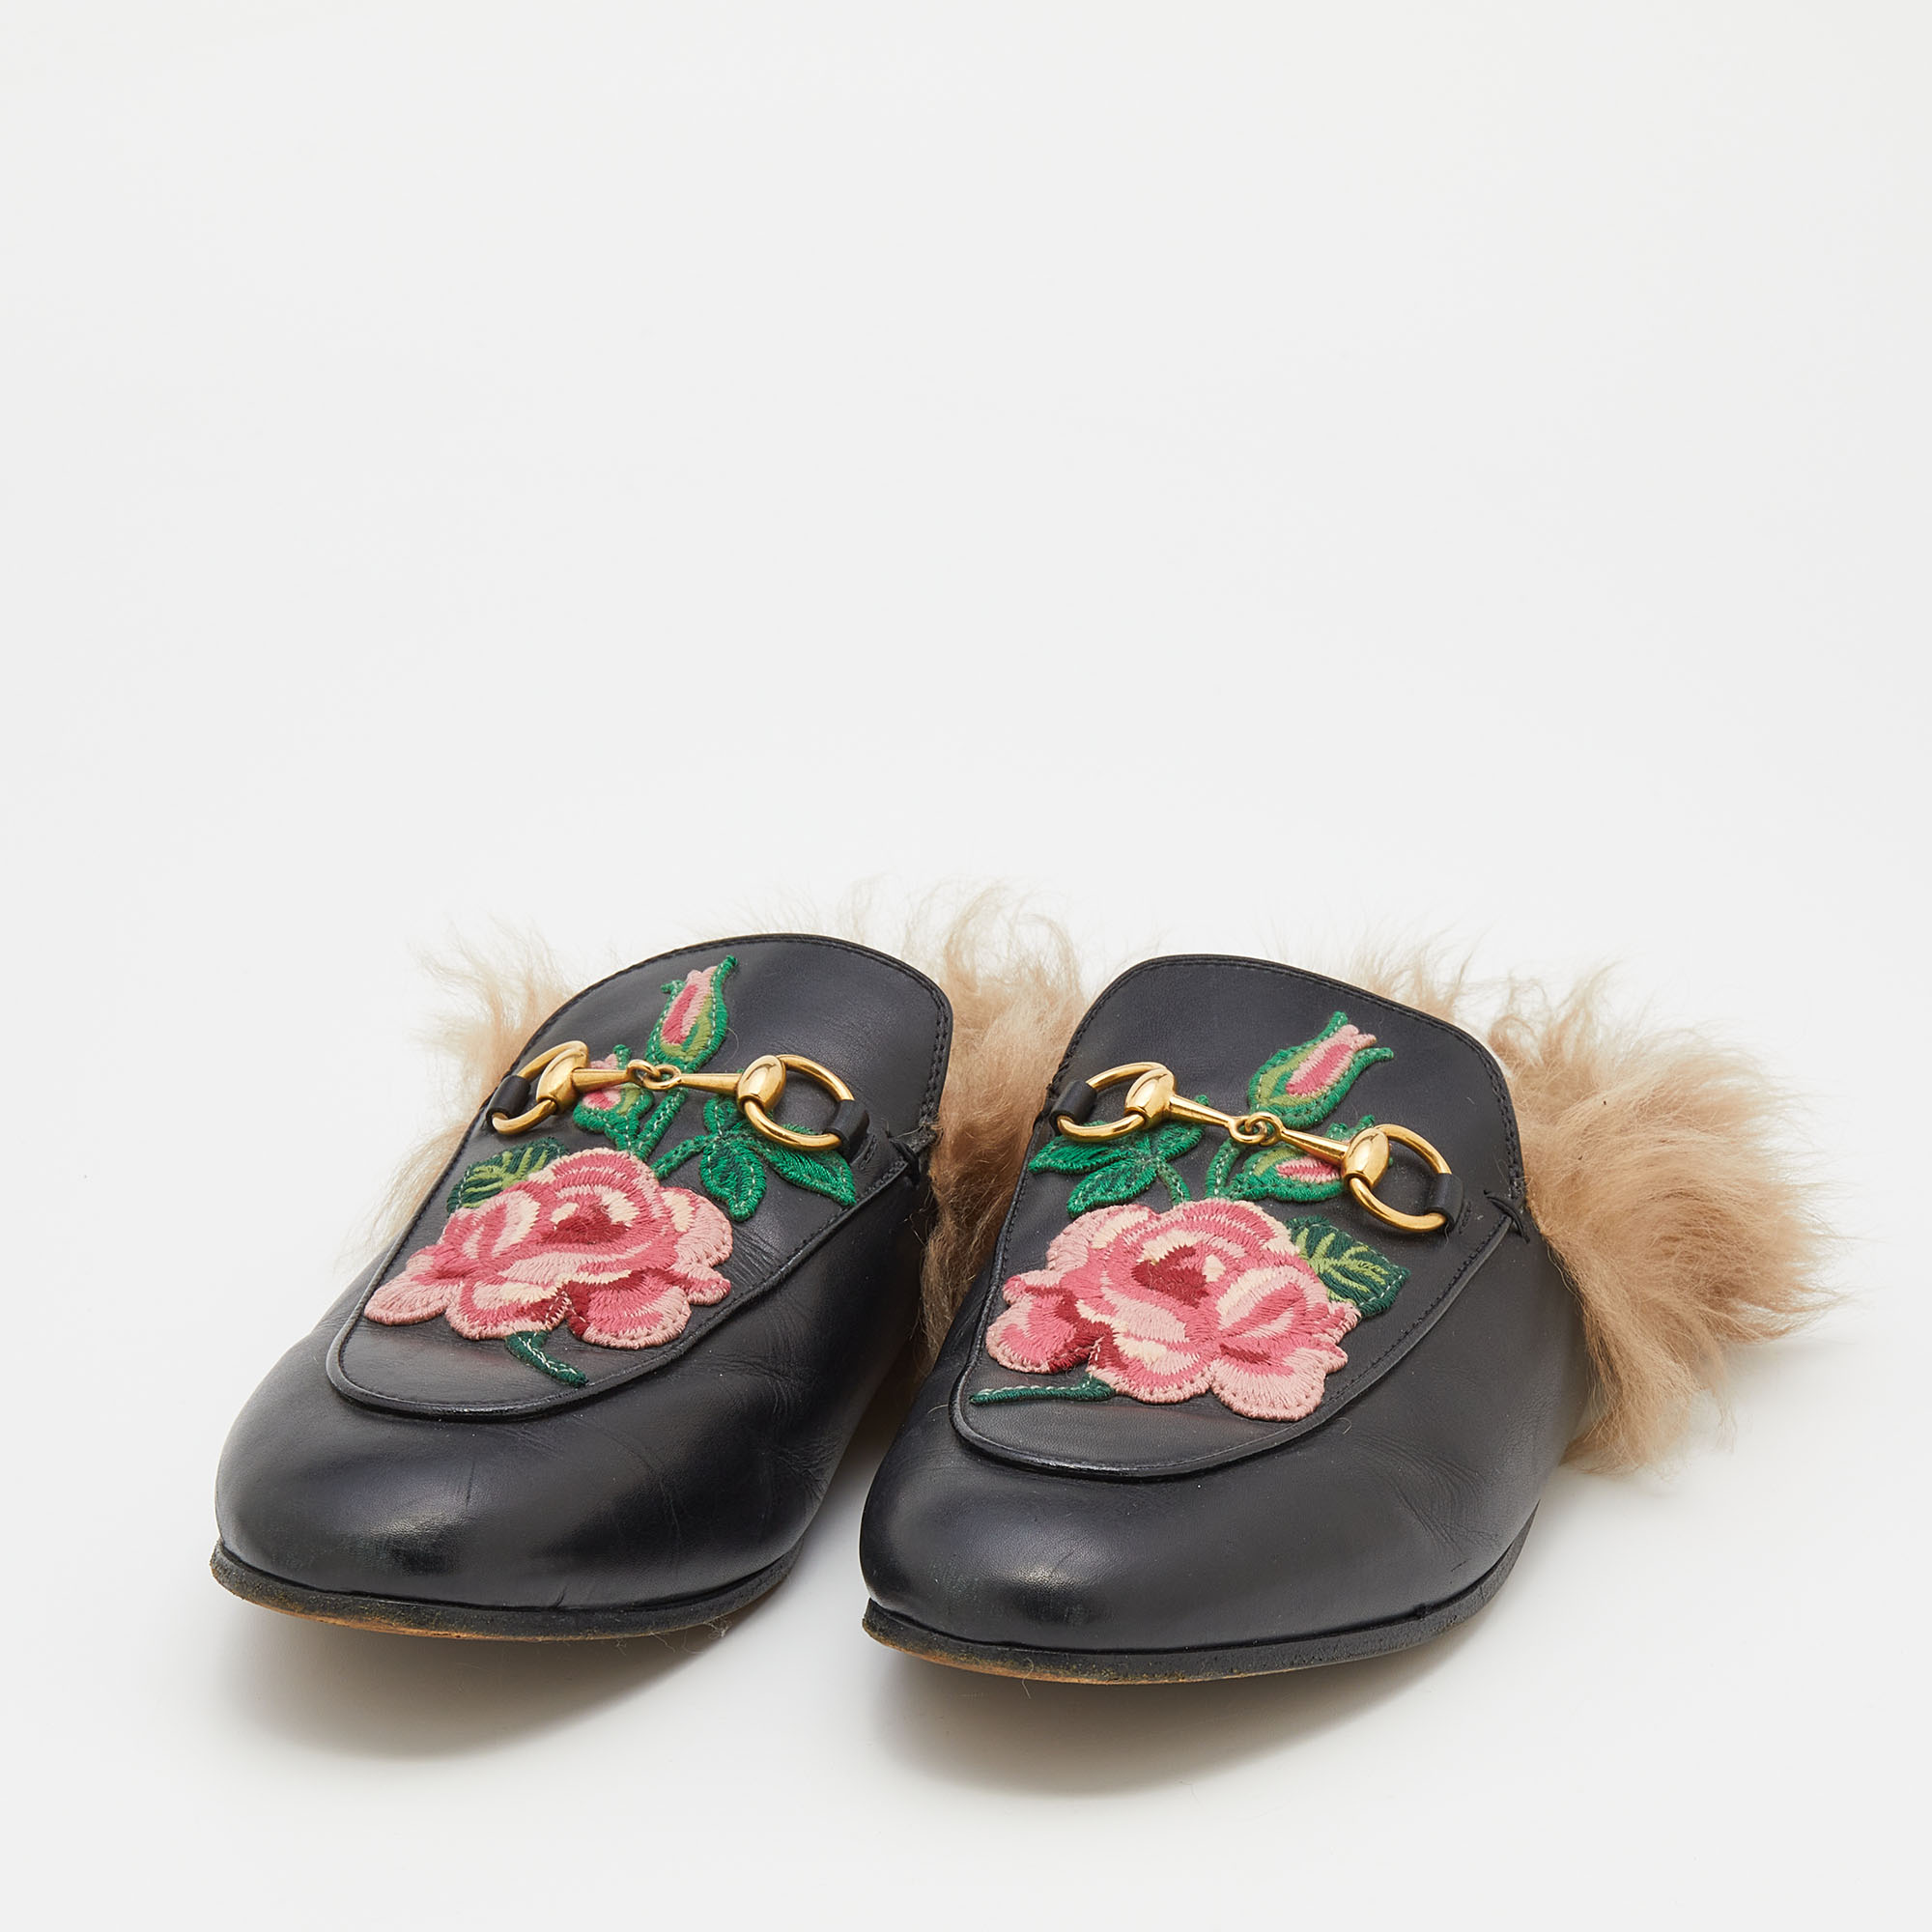 

Gucci Black Floral Embroidered Leather and Fur Lined Horsebit Princetown Mules Size